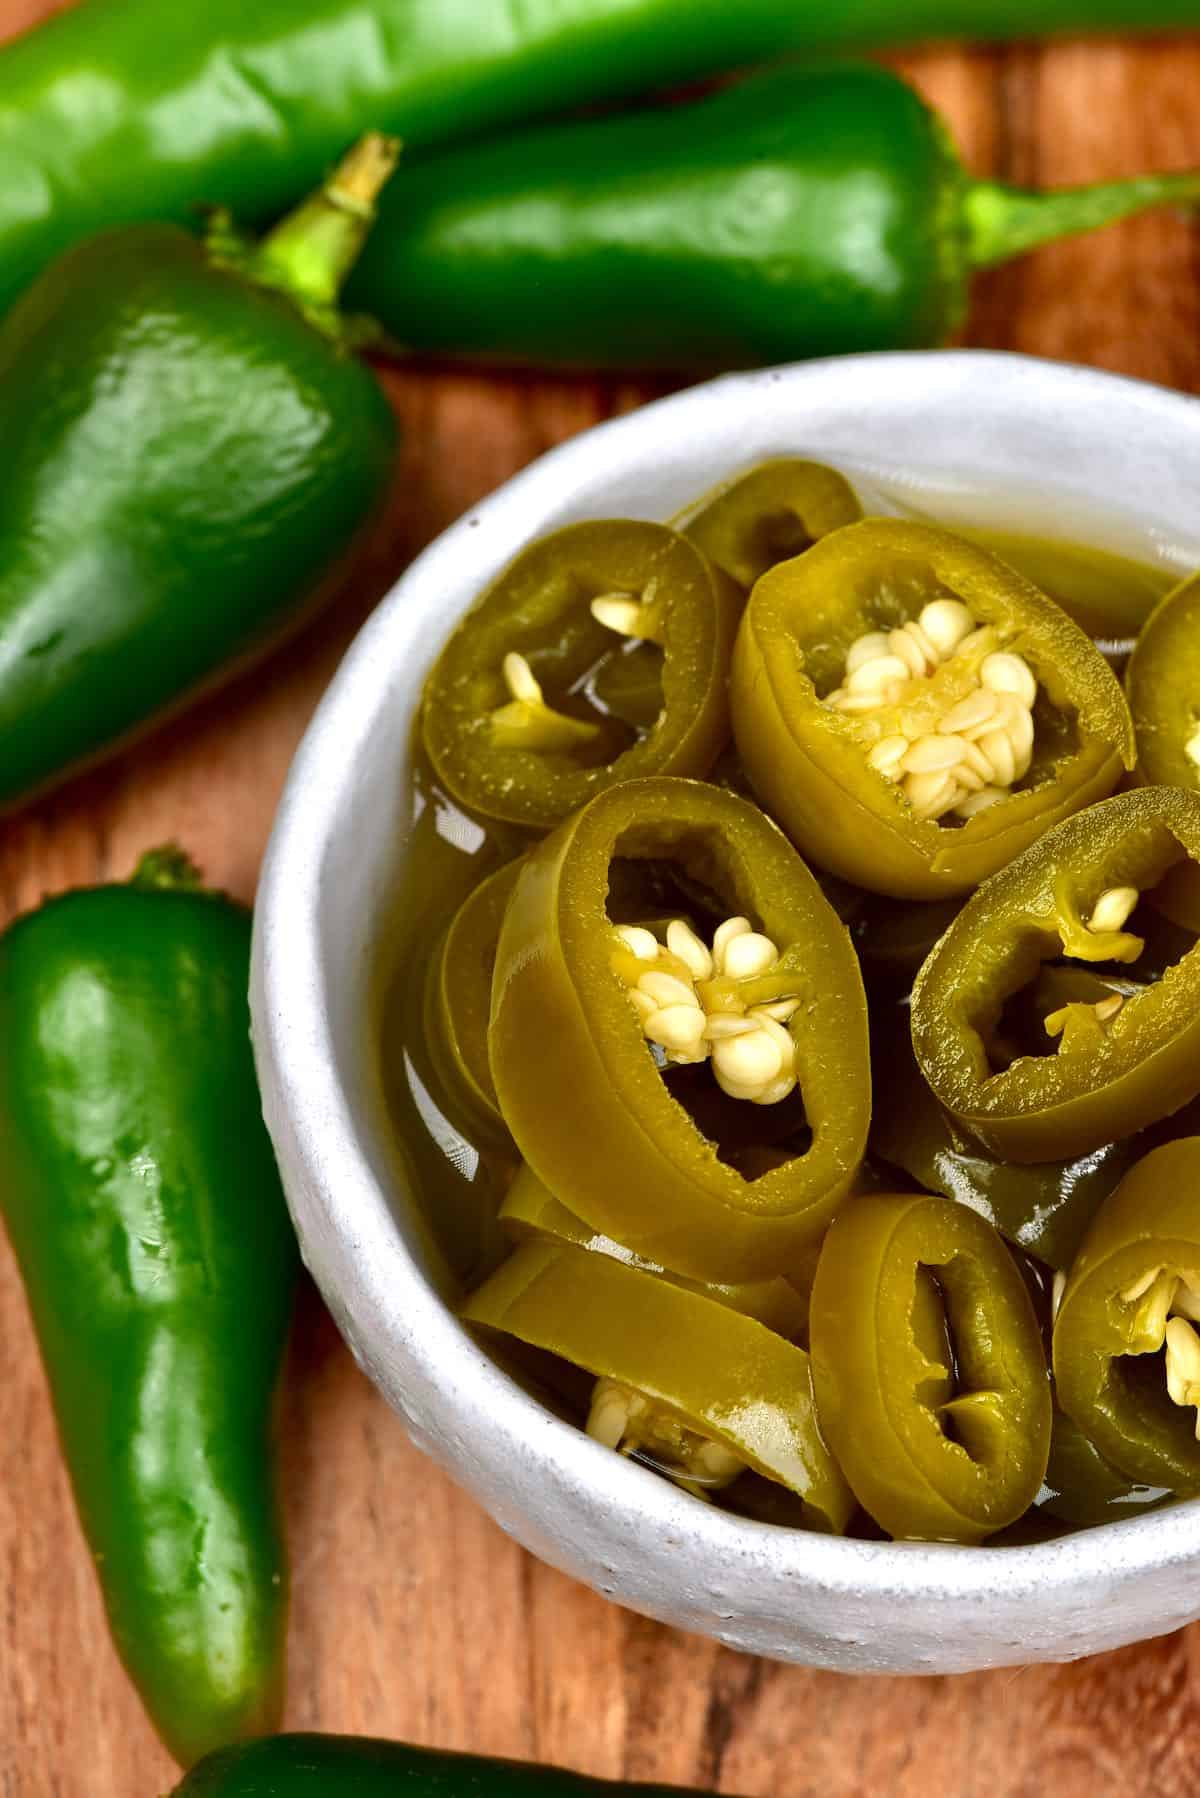 Pickled jalapeños in a bowl and some raw jalapeños next to them